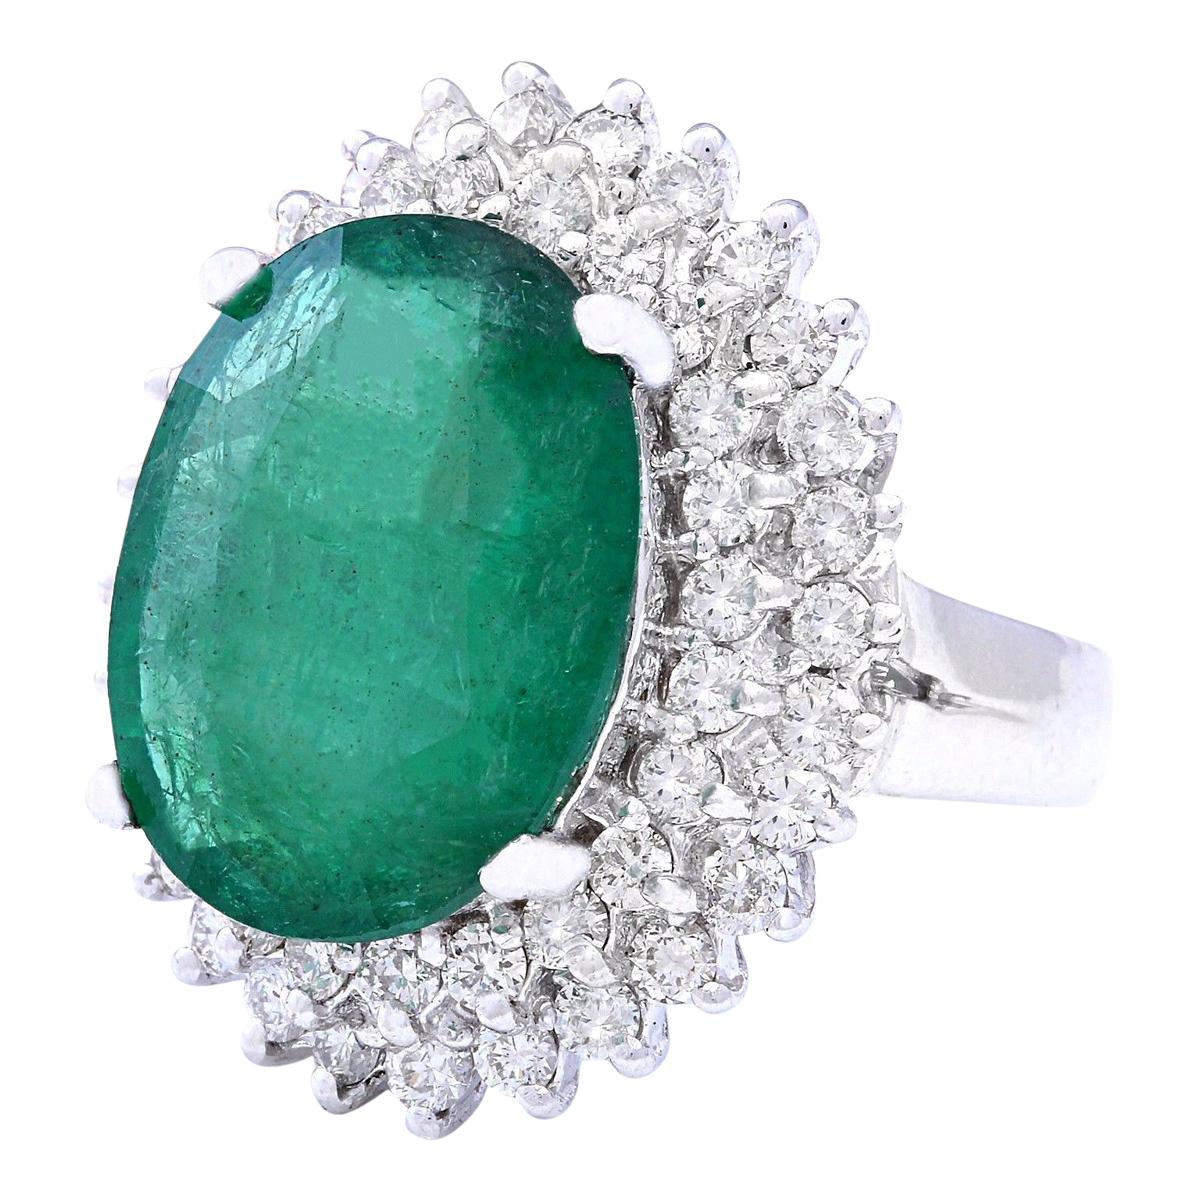 Make a statement with this breathtaking Emerald Diamond Cocktail Ring, crafted in 14K Solid White Gold. Featuring a stunning 7.30 carat oval-shaped Emerald measuring 16.00x12.00 mm, accented by sparkling diamonds totaling 2.00 carats. With a face